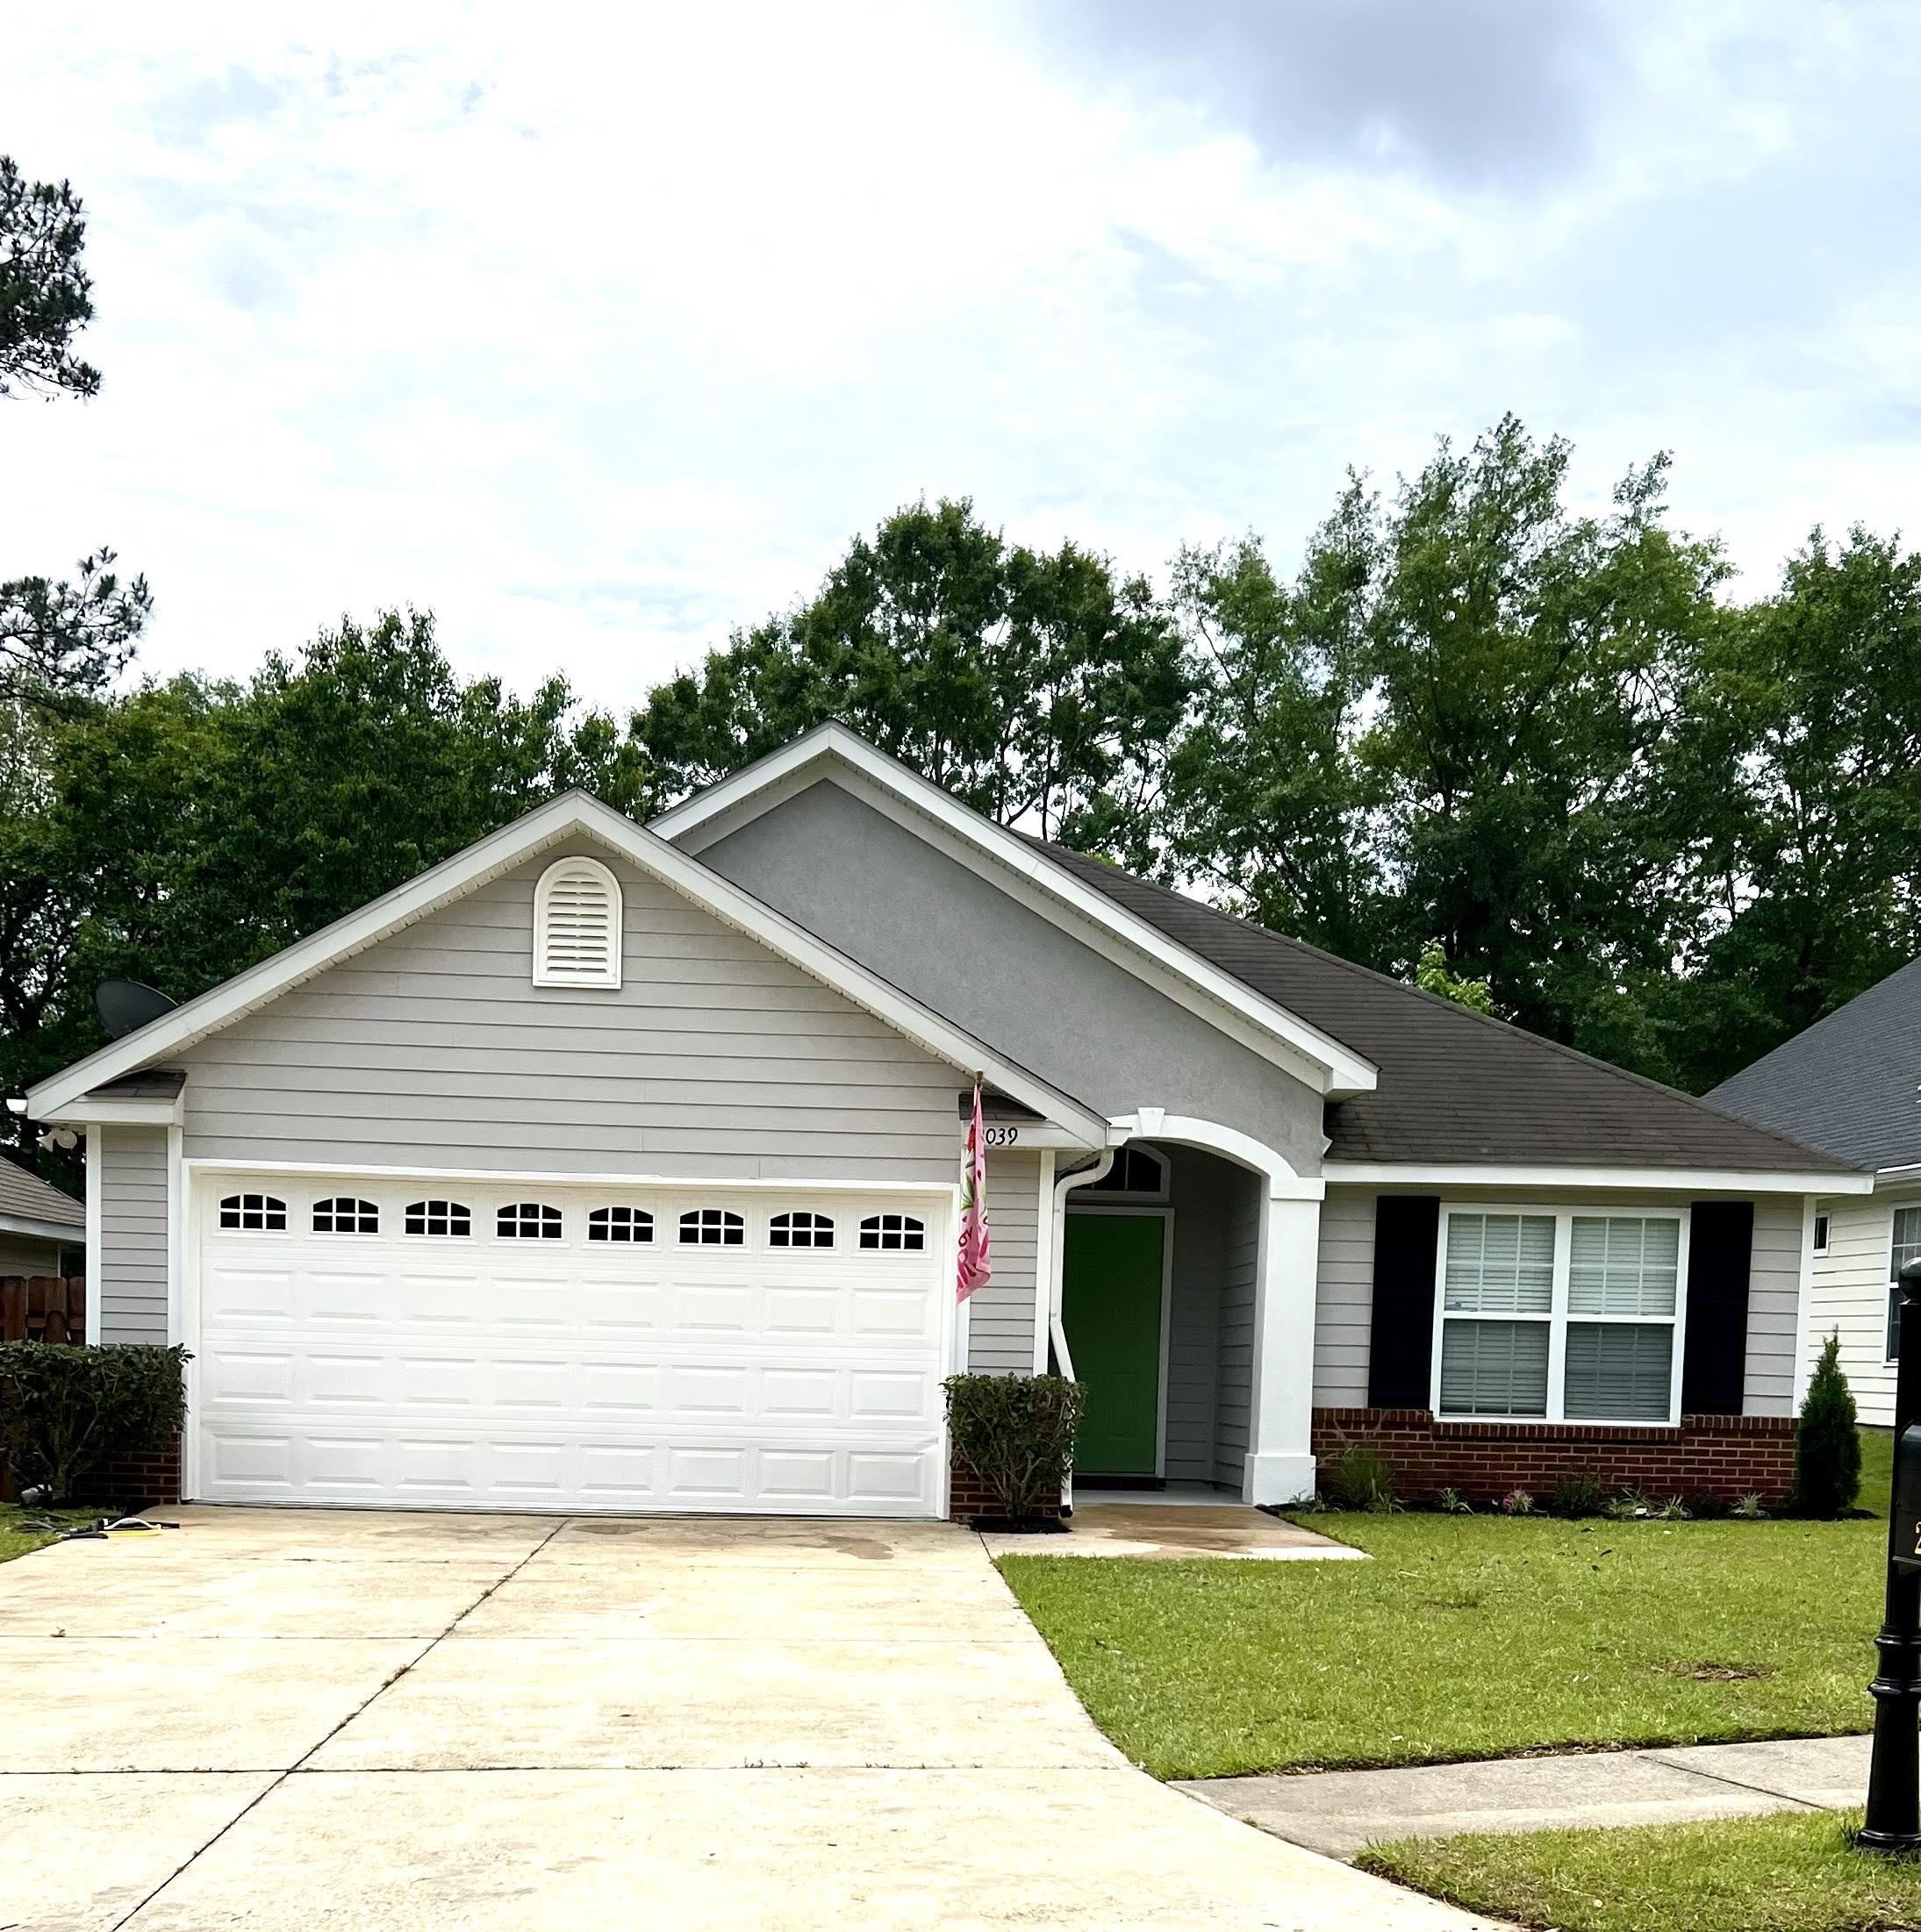 Property: 2039 Sunny Dale Drive,Tallahassee, FL